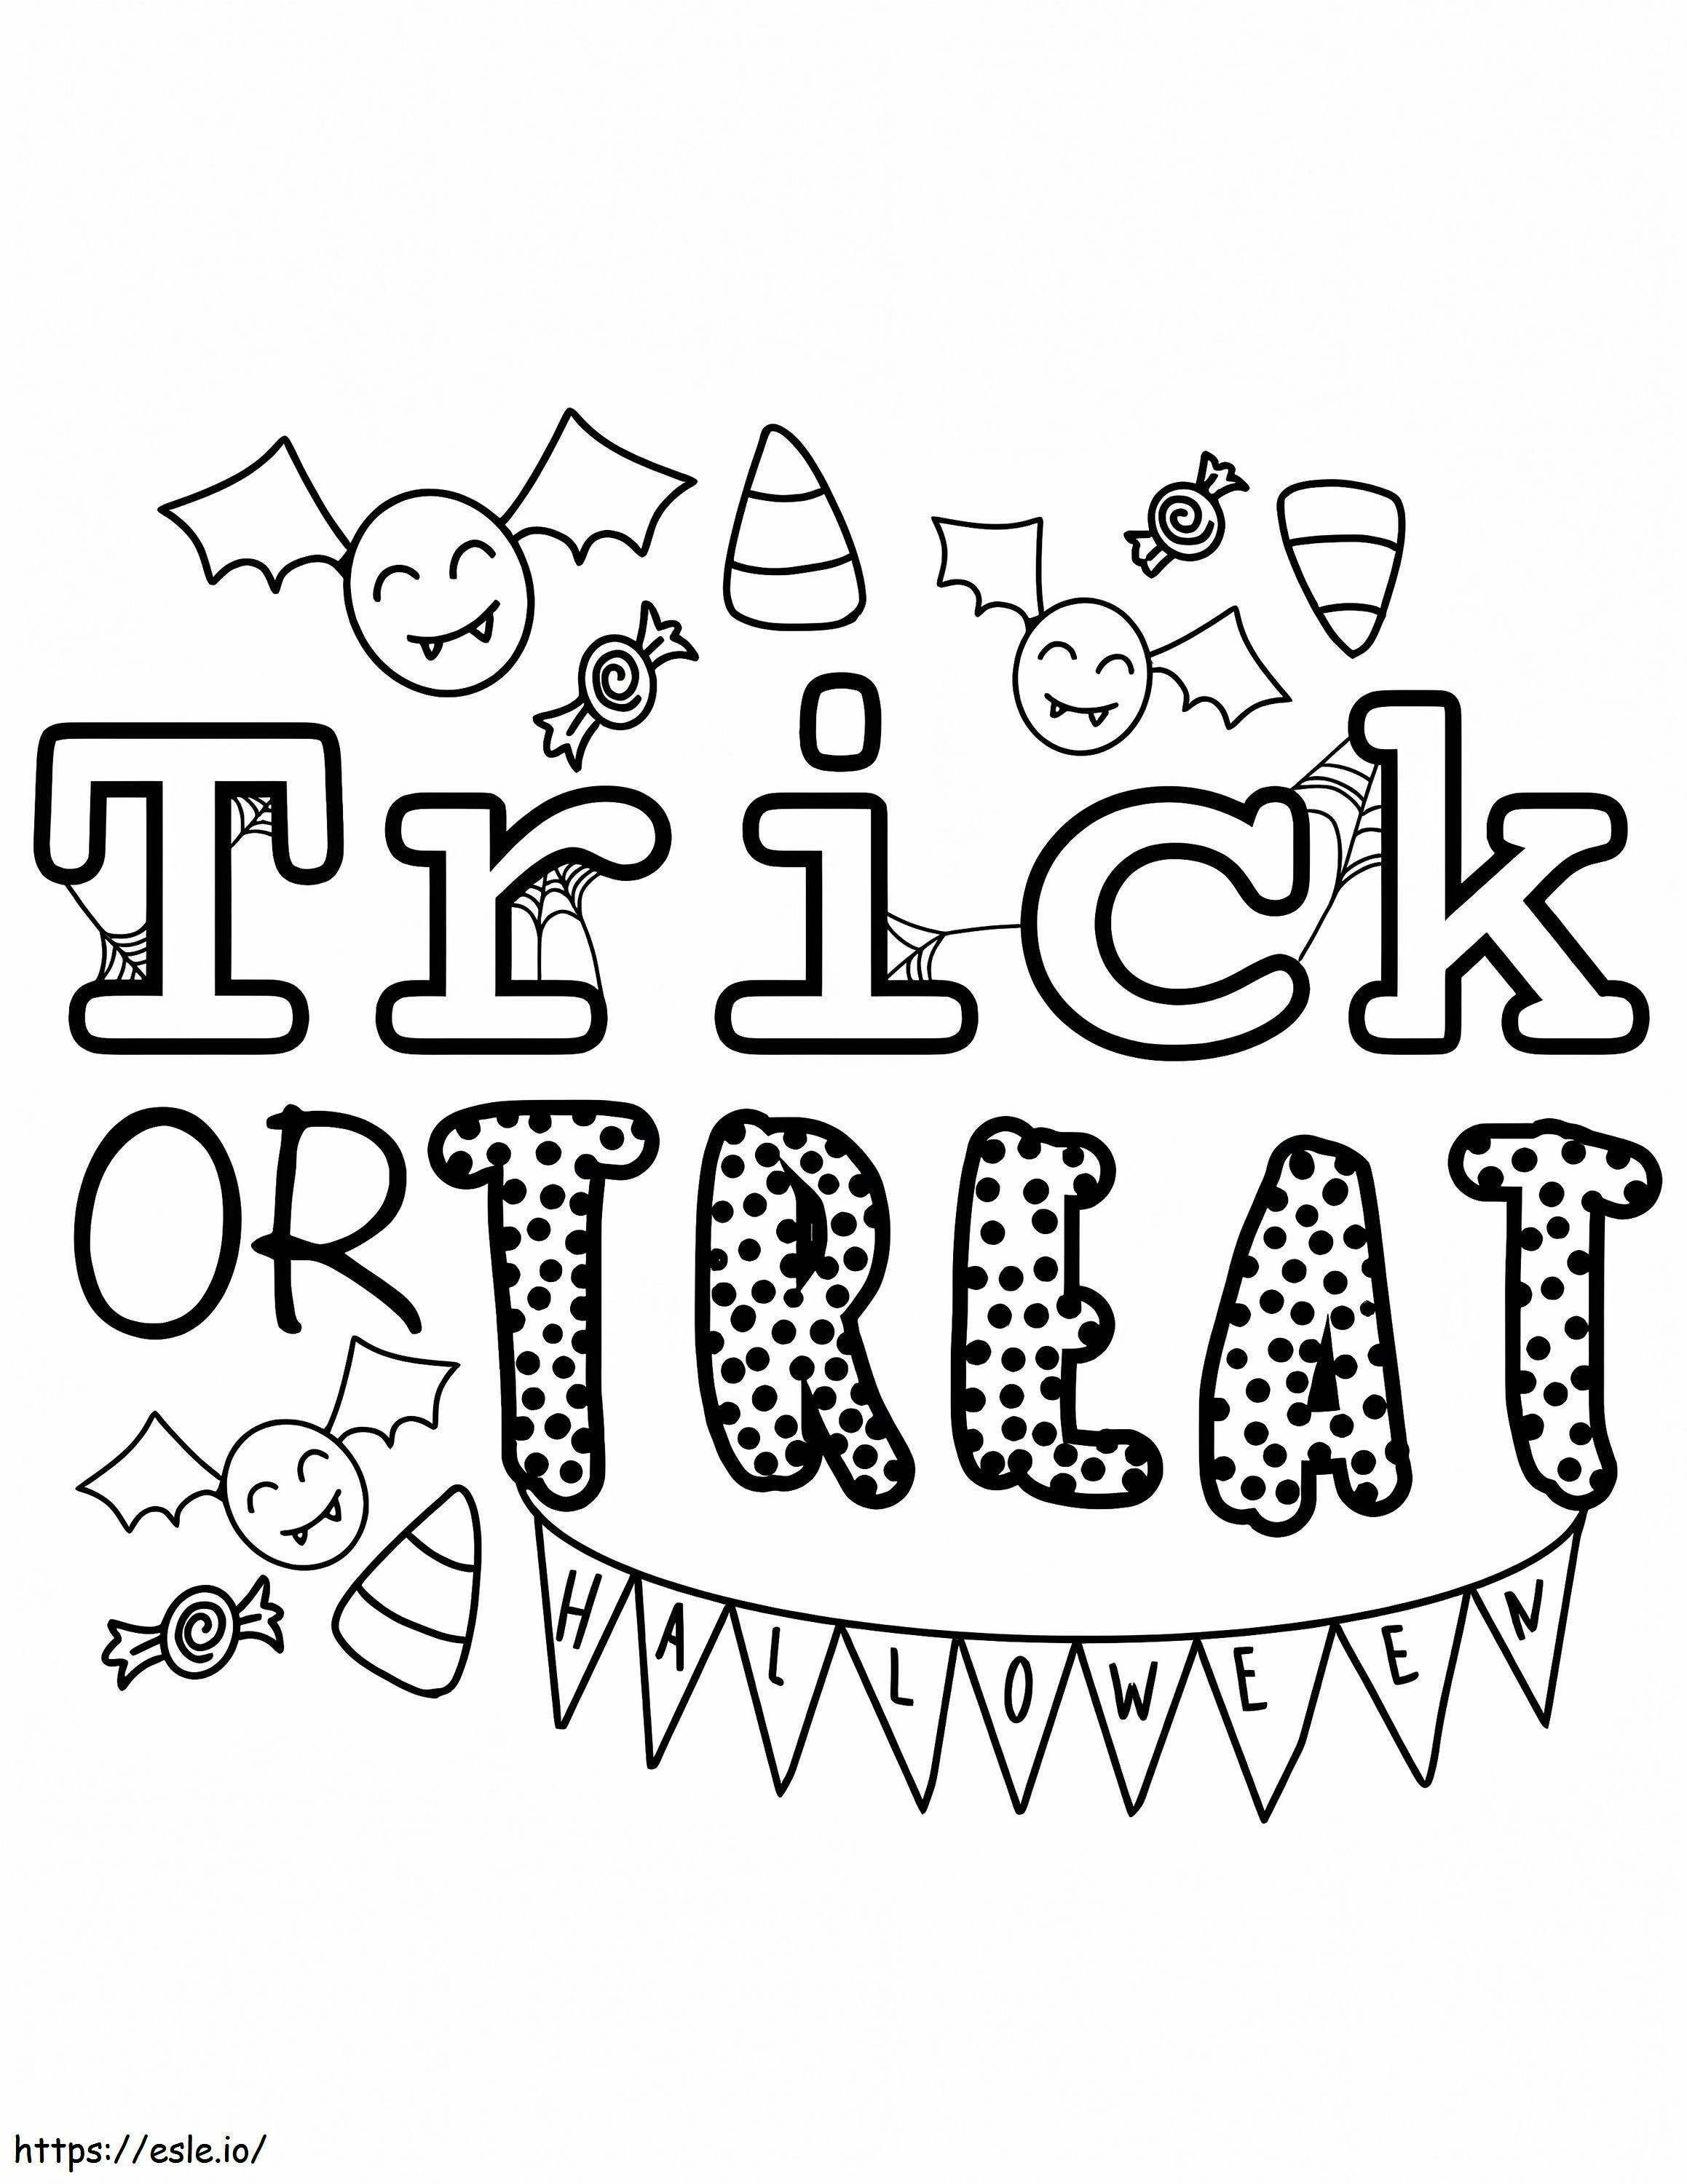 Trick Or Treat coloring page